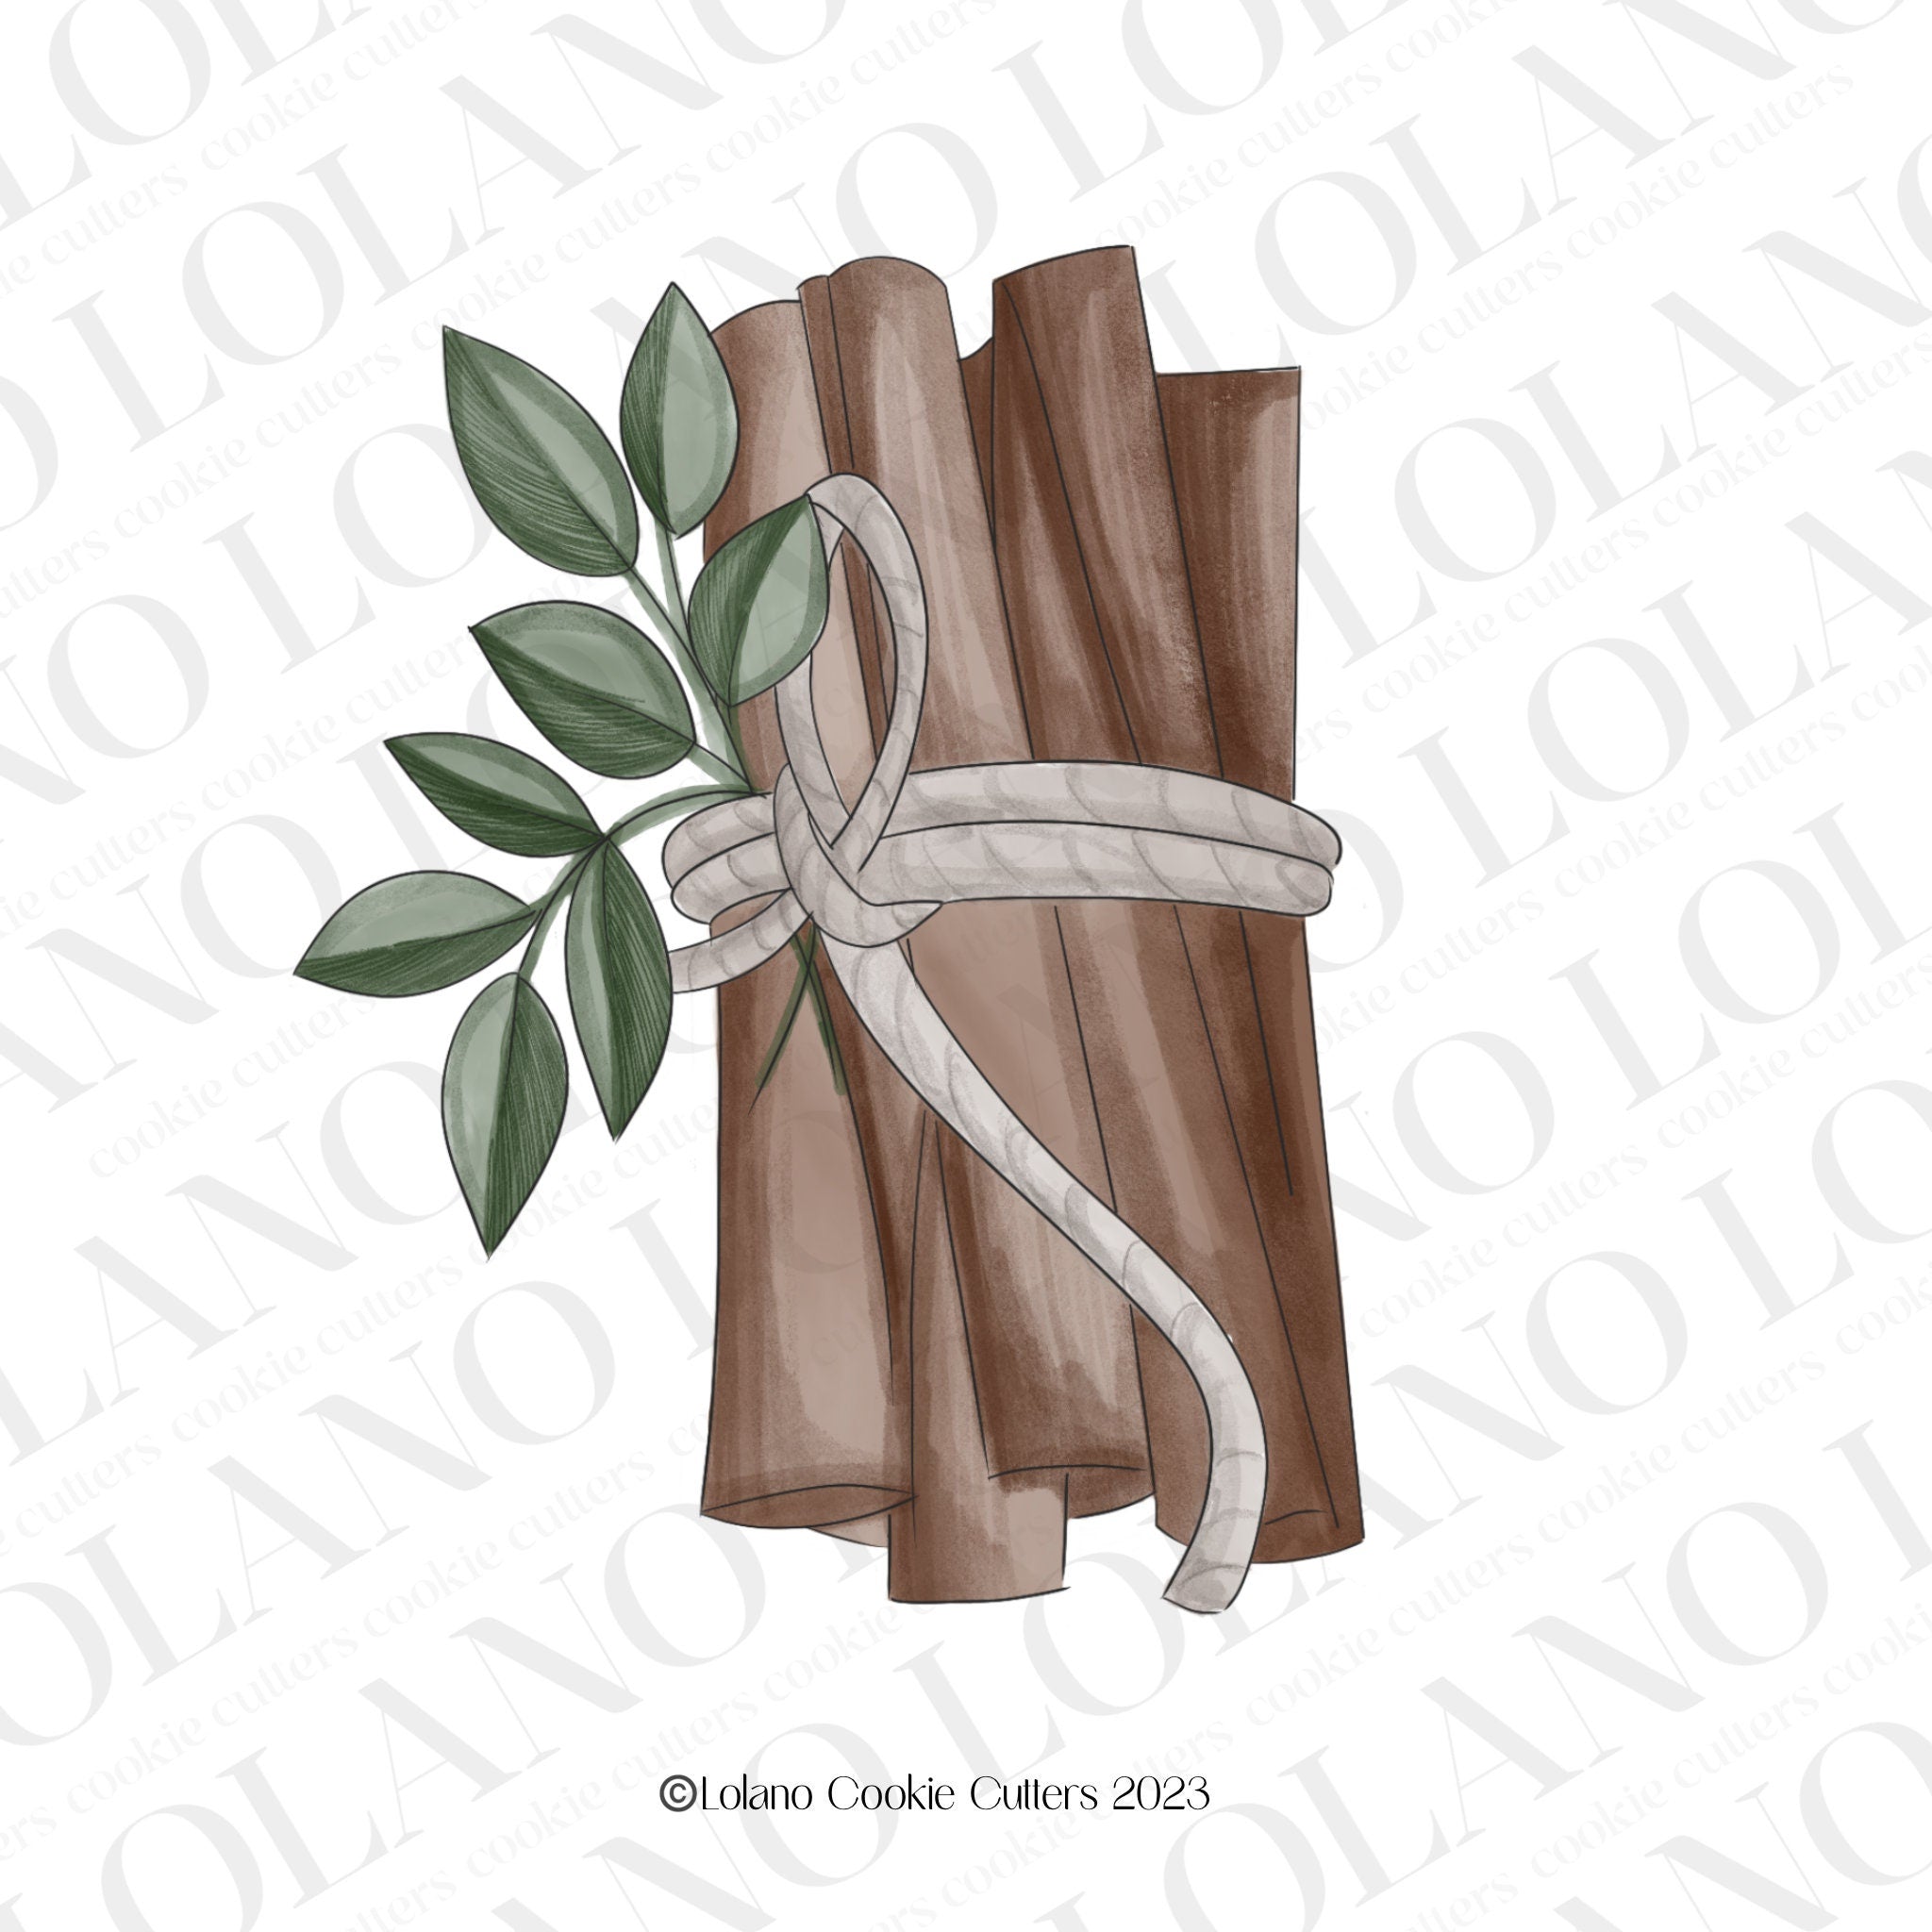 Cinnamon stick with greenery cookie cutter